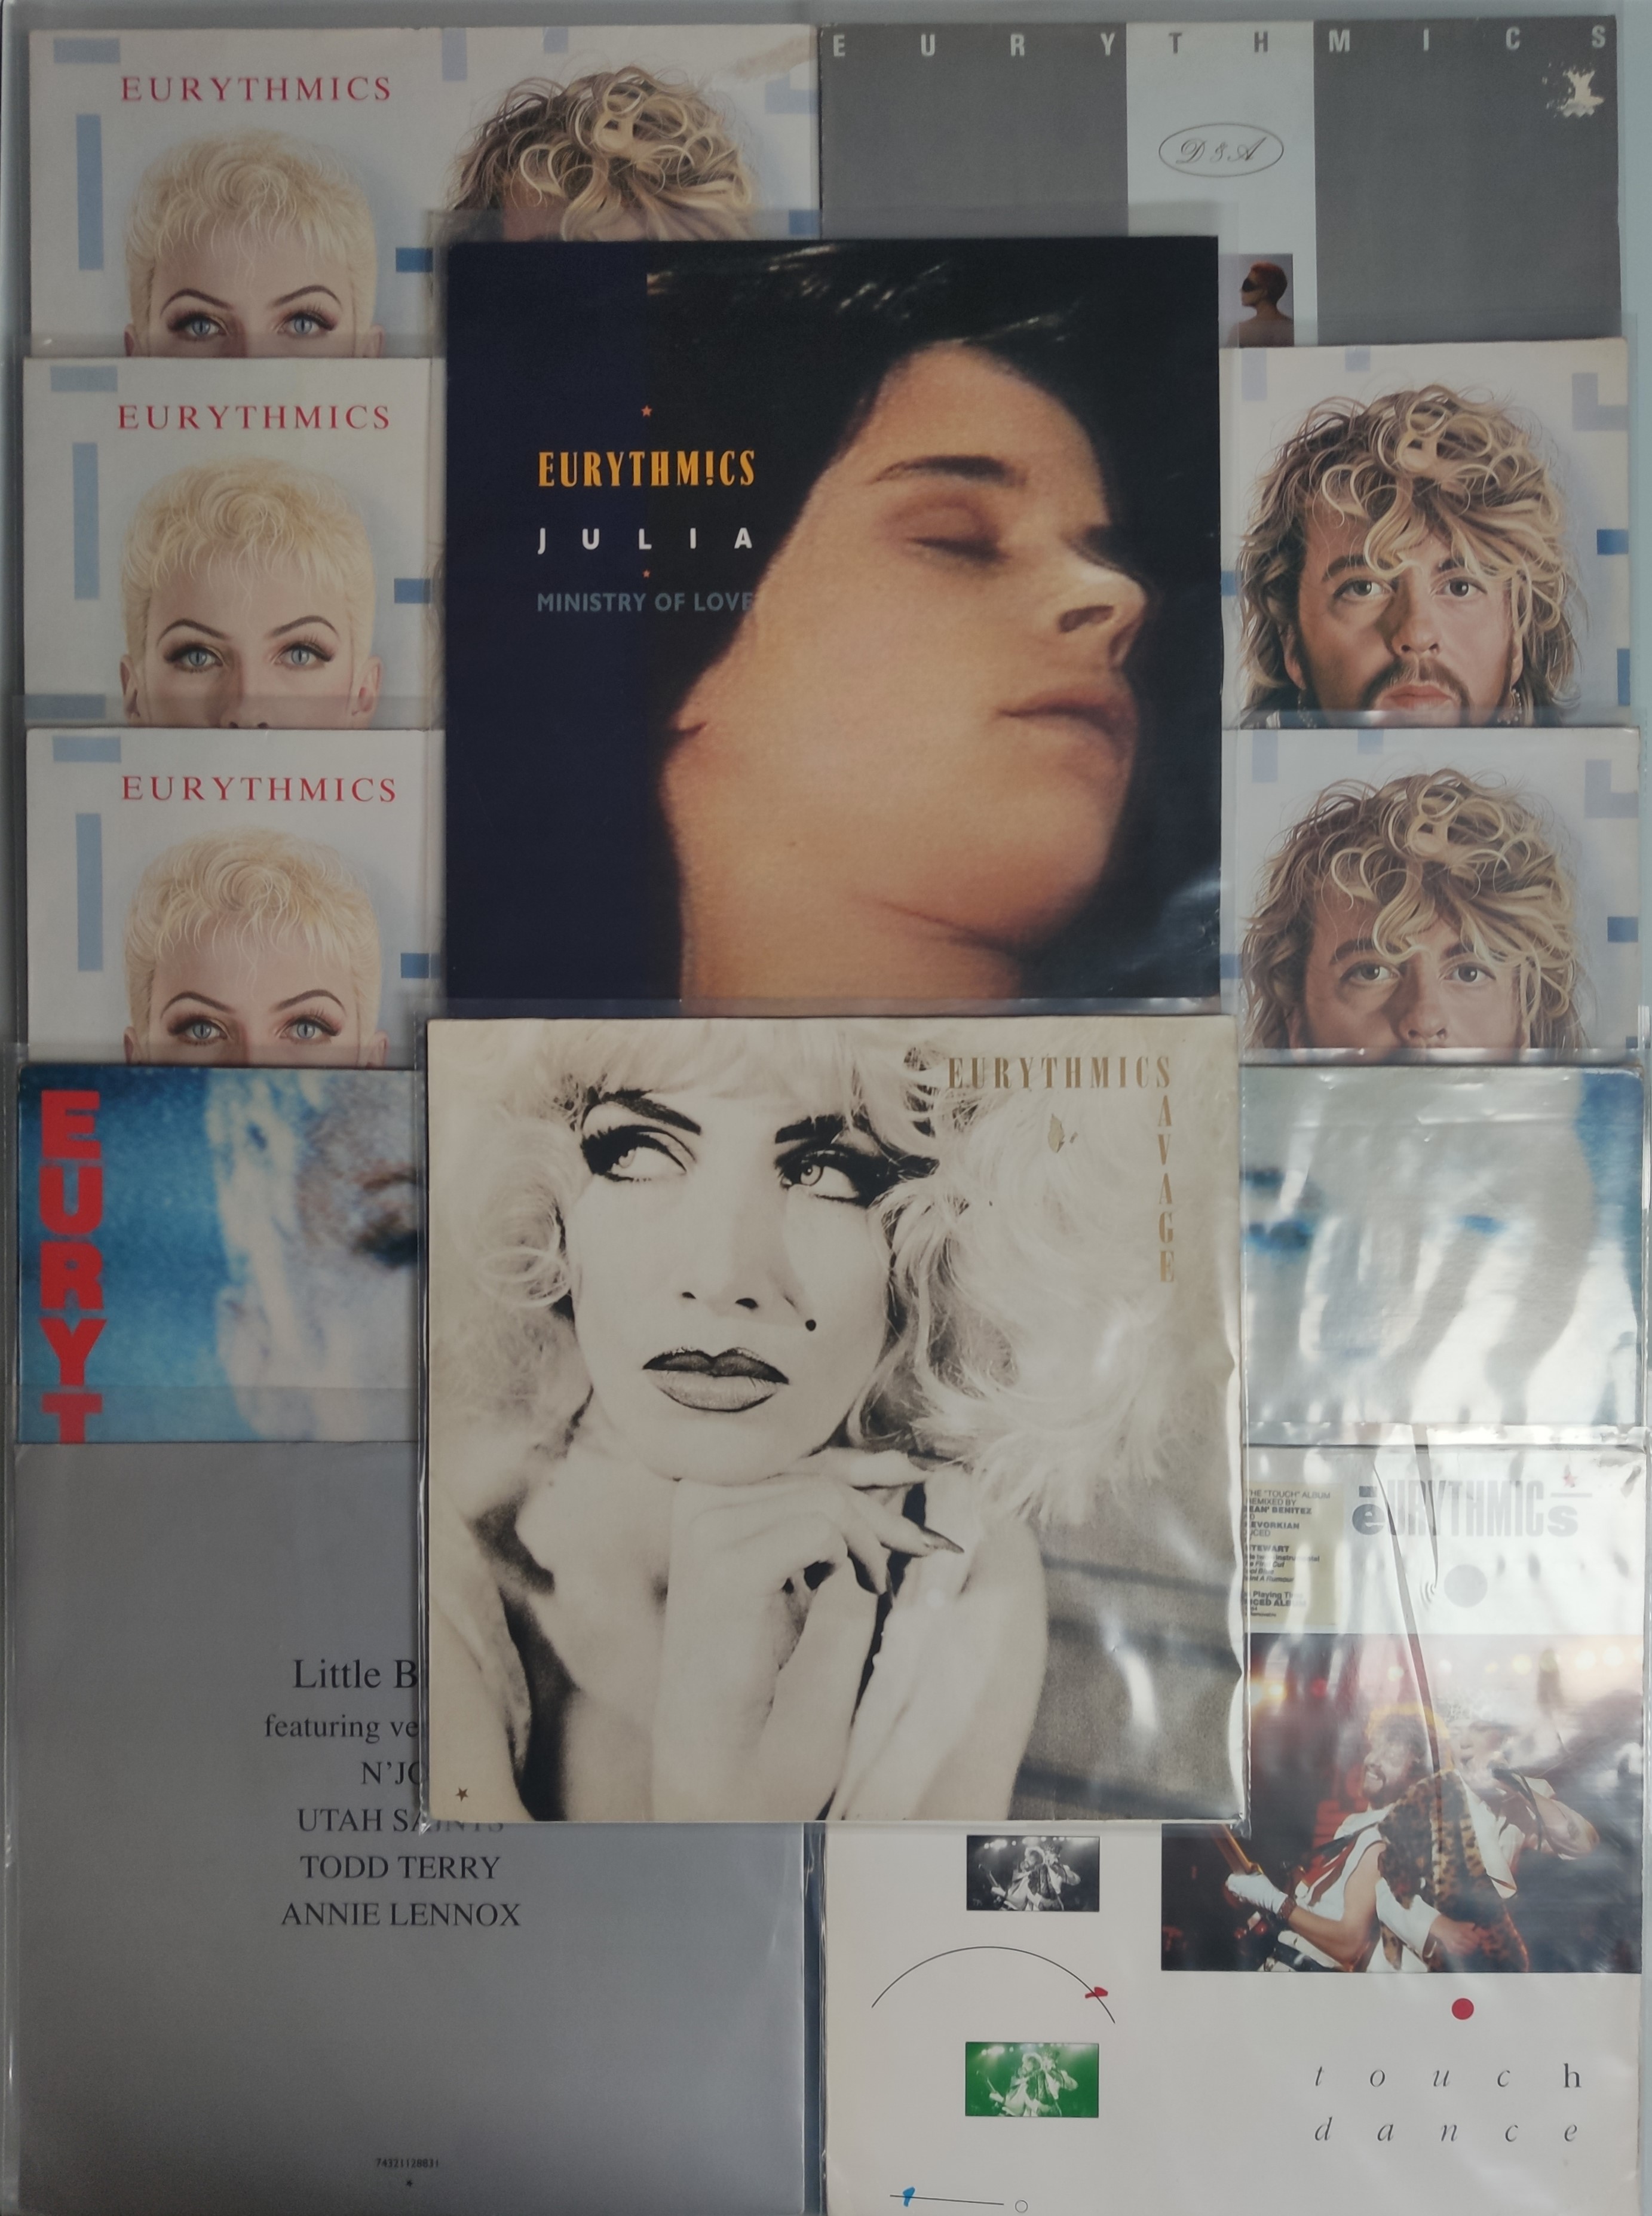 A Collection of 12 x Eurythmics / Annie Lennox New Wave Vinyl LPs and 12” Single.